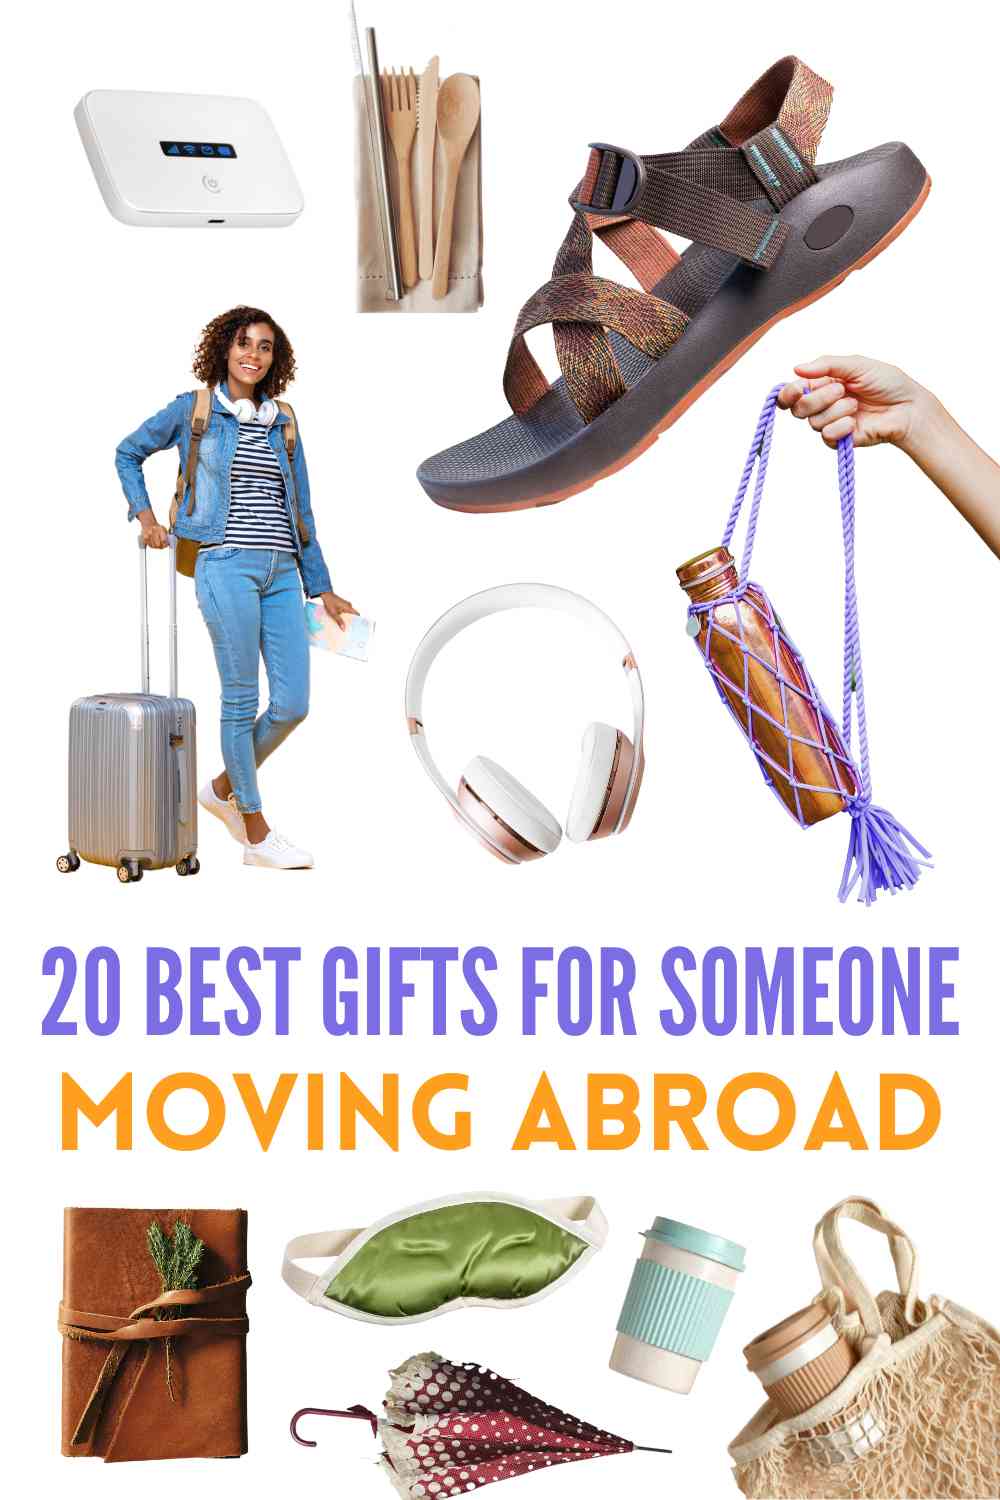 need to find the best gifts for someone going abroad